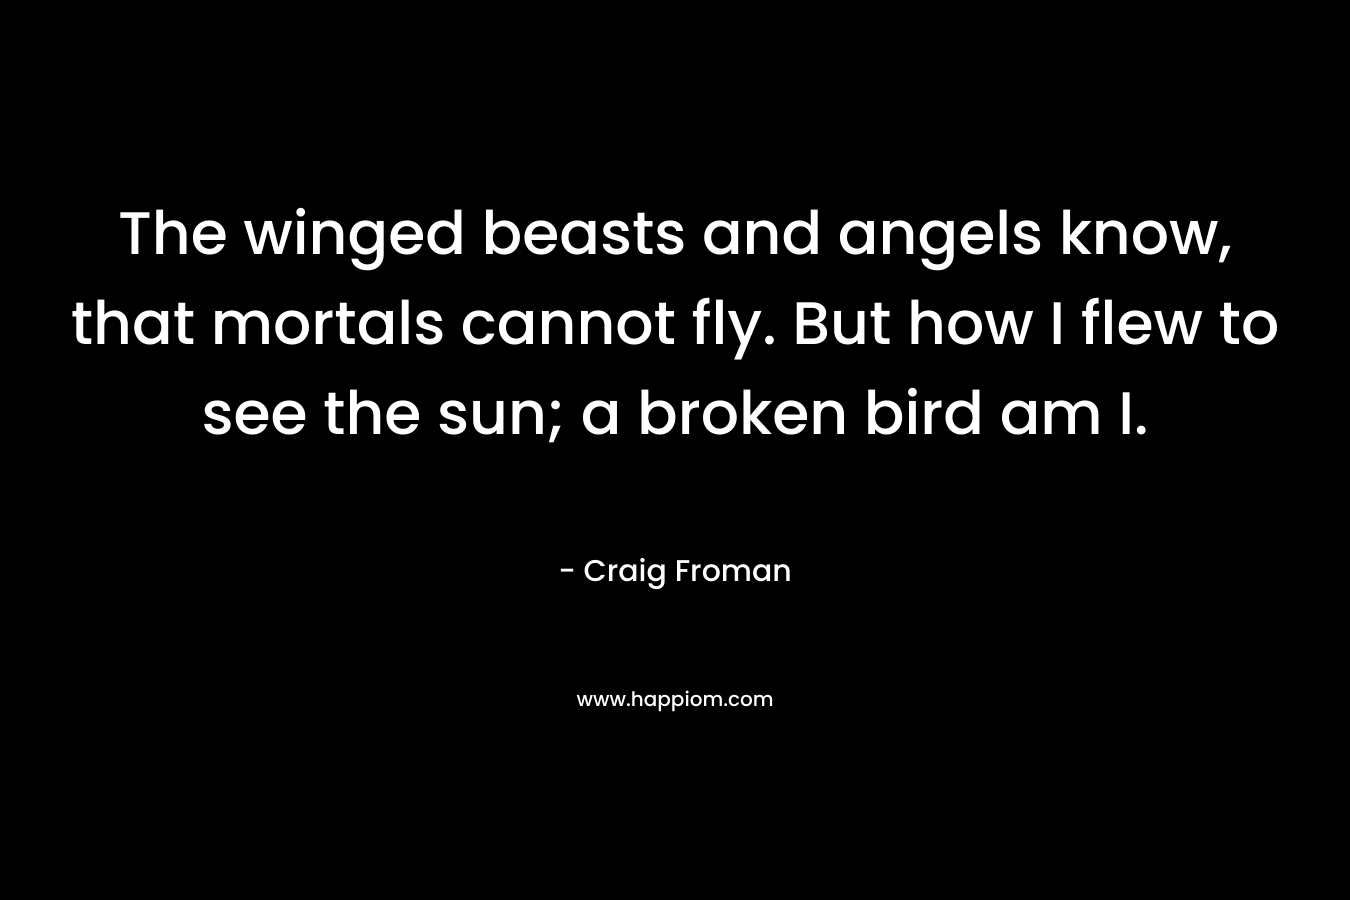 The winged beasts and angels know, that mortals cannot fly. But how I flew to see the sun; a broken bird am I.